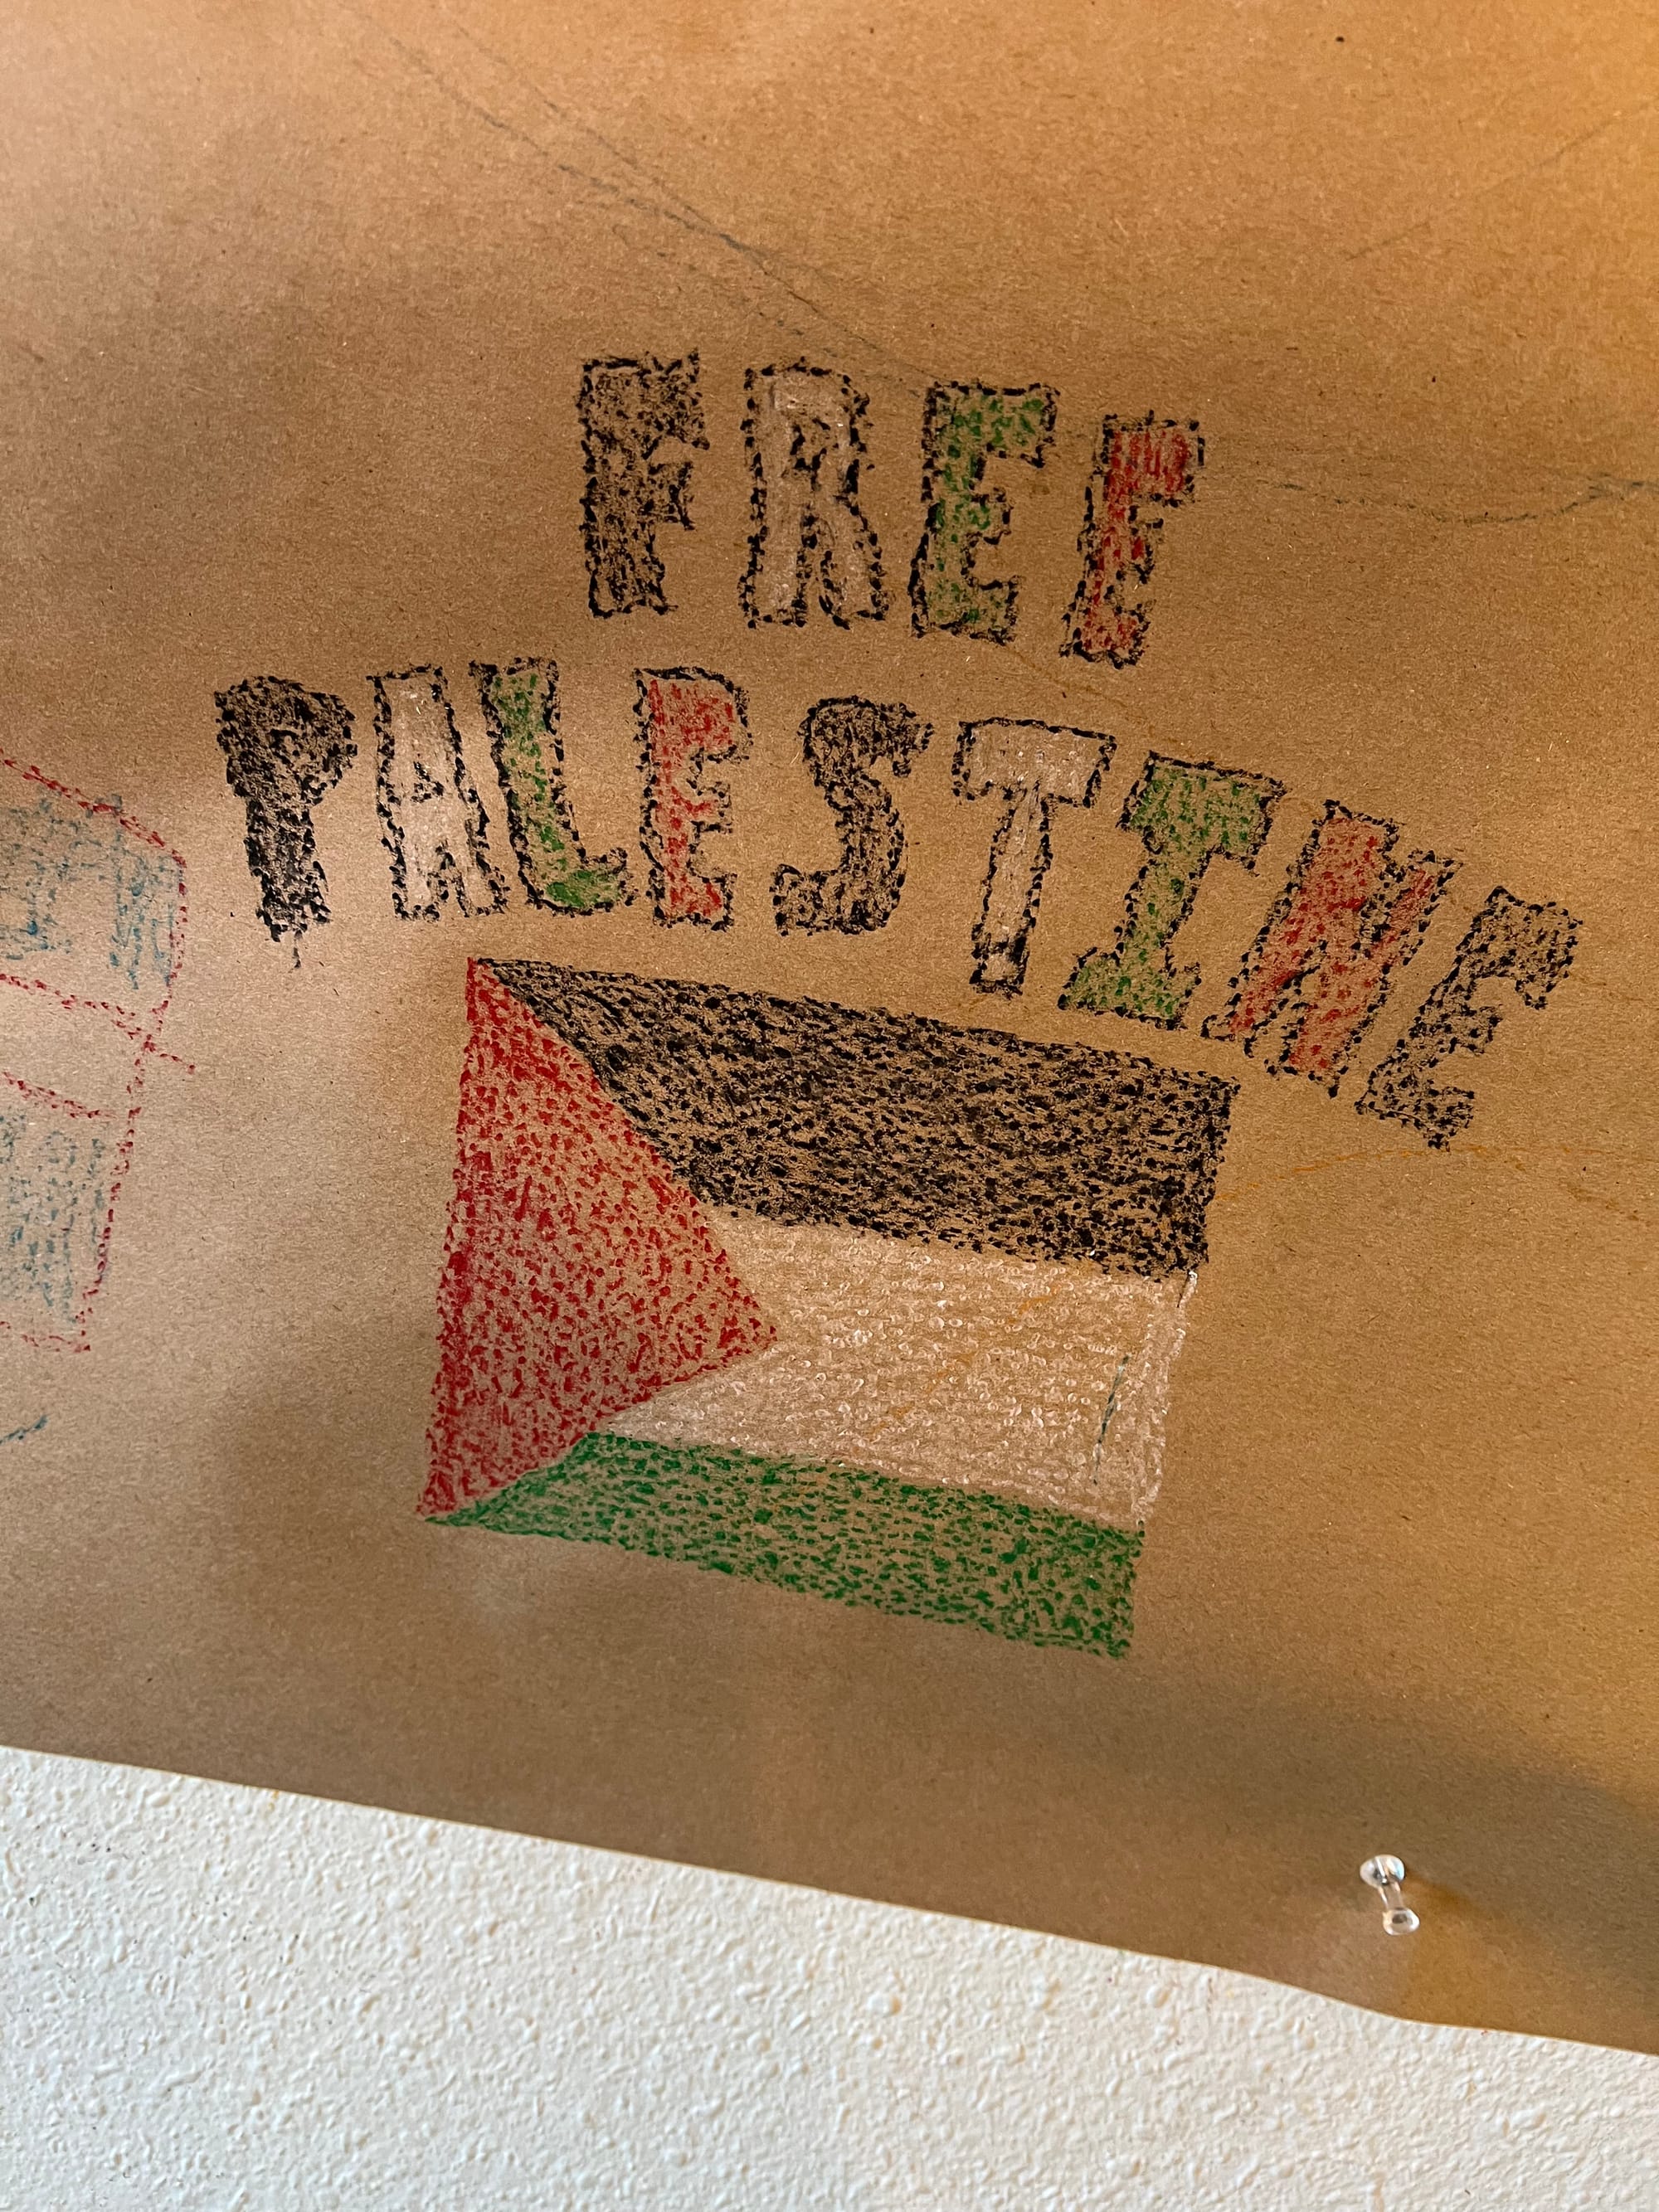 Free Palestine and a Palestinian flag drawn on paper